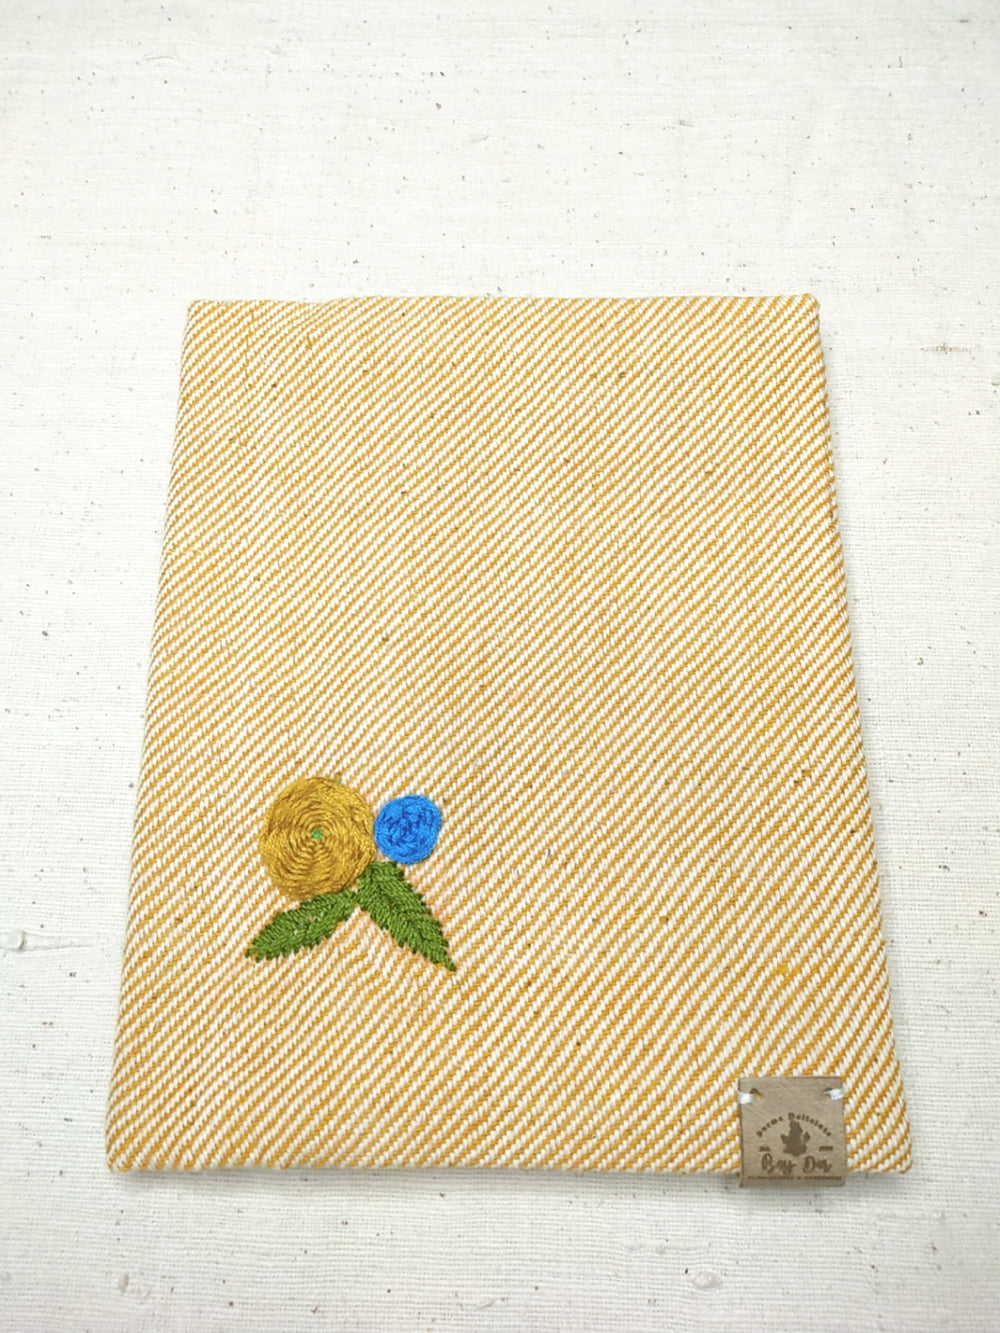 100% Cotton Book Cover with Beautiful Embroidery Flowers (Design 1)